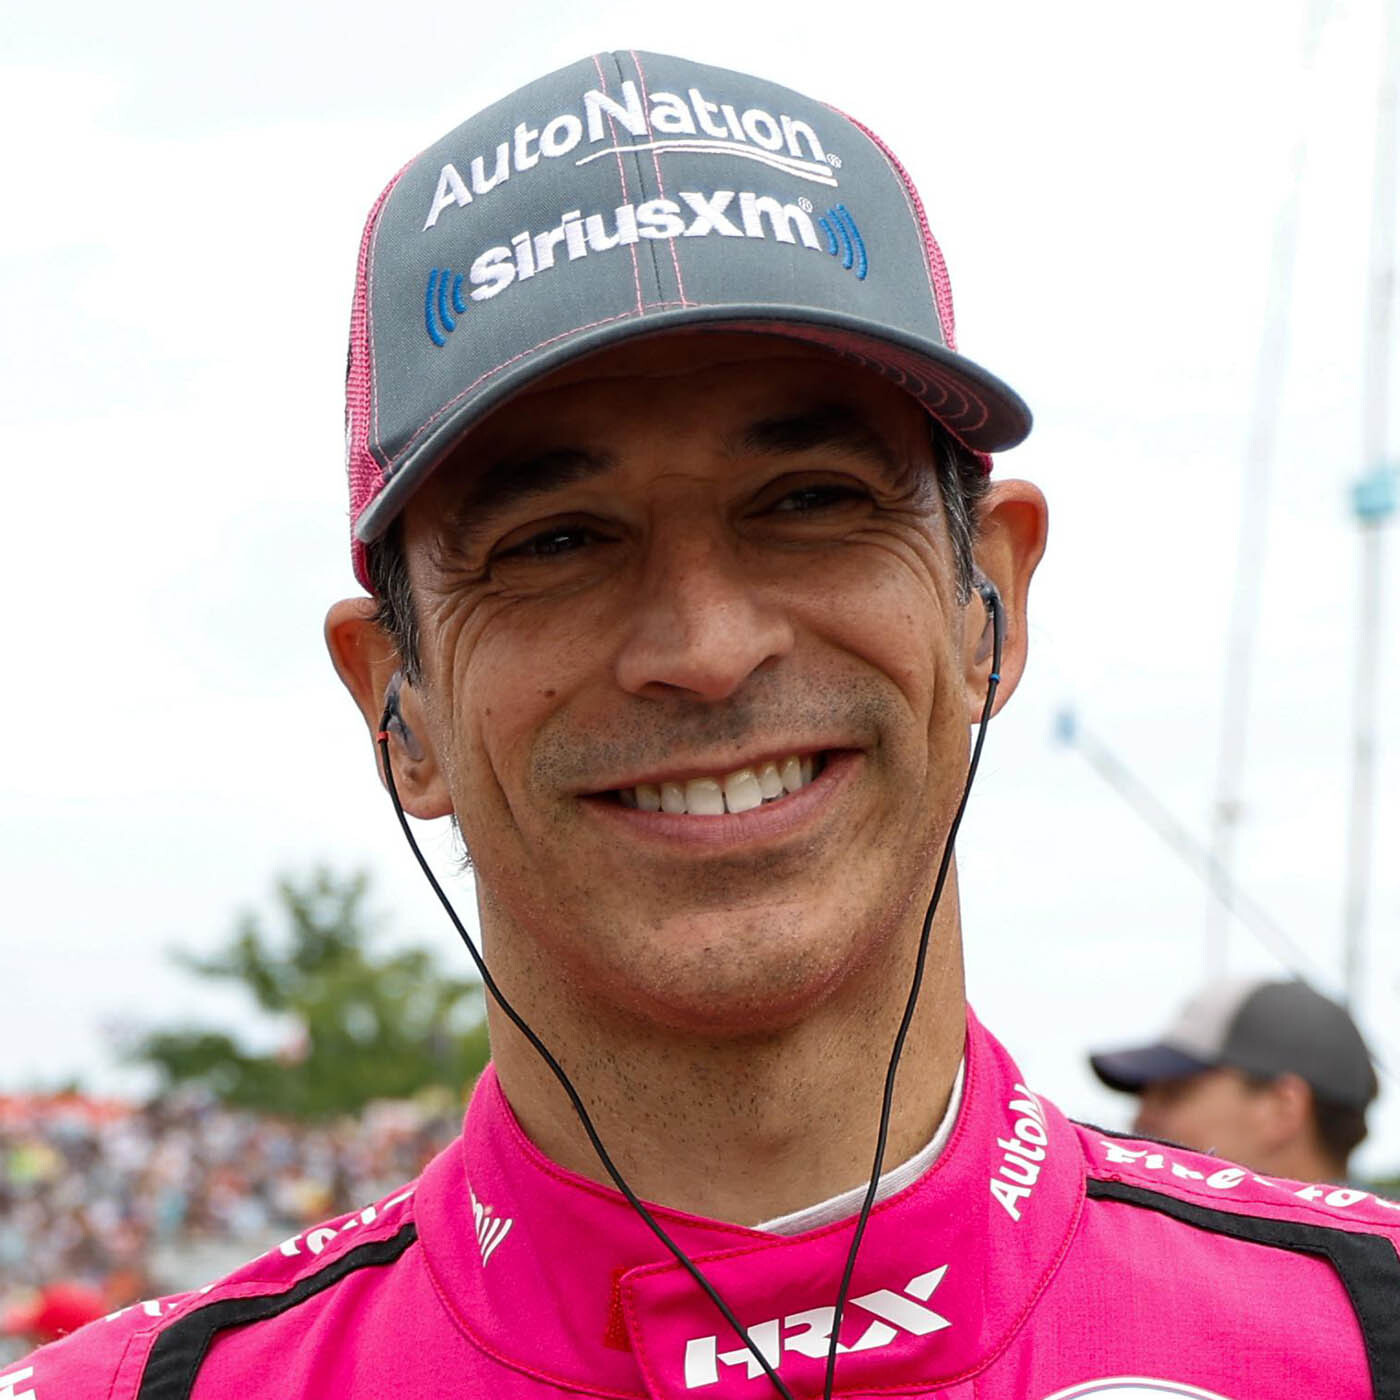 MP 1285: The Week In IndyCar with Helio Castroneves, June 23 2022